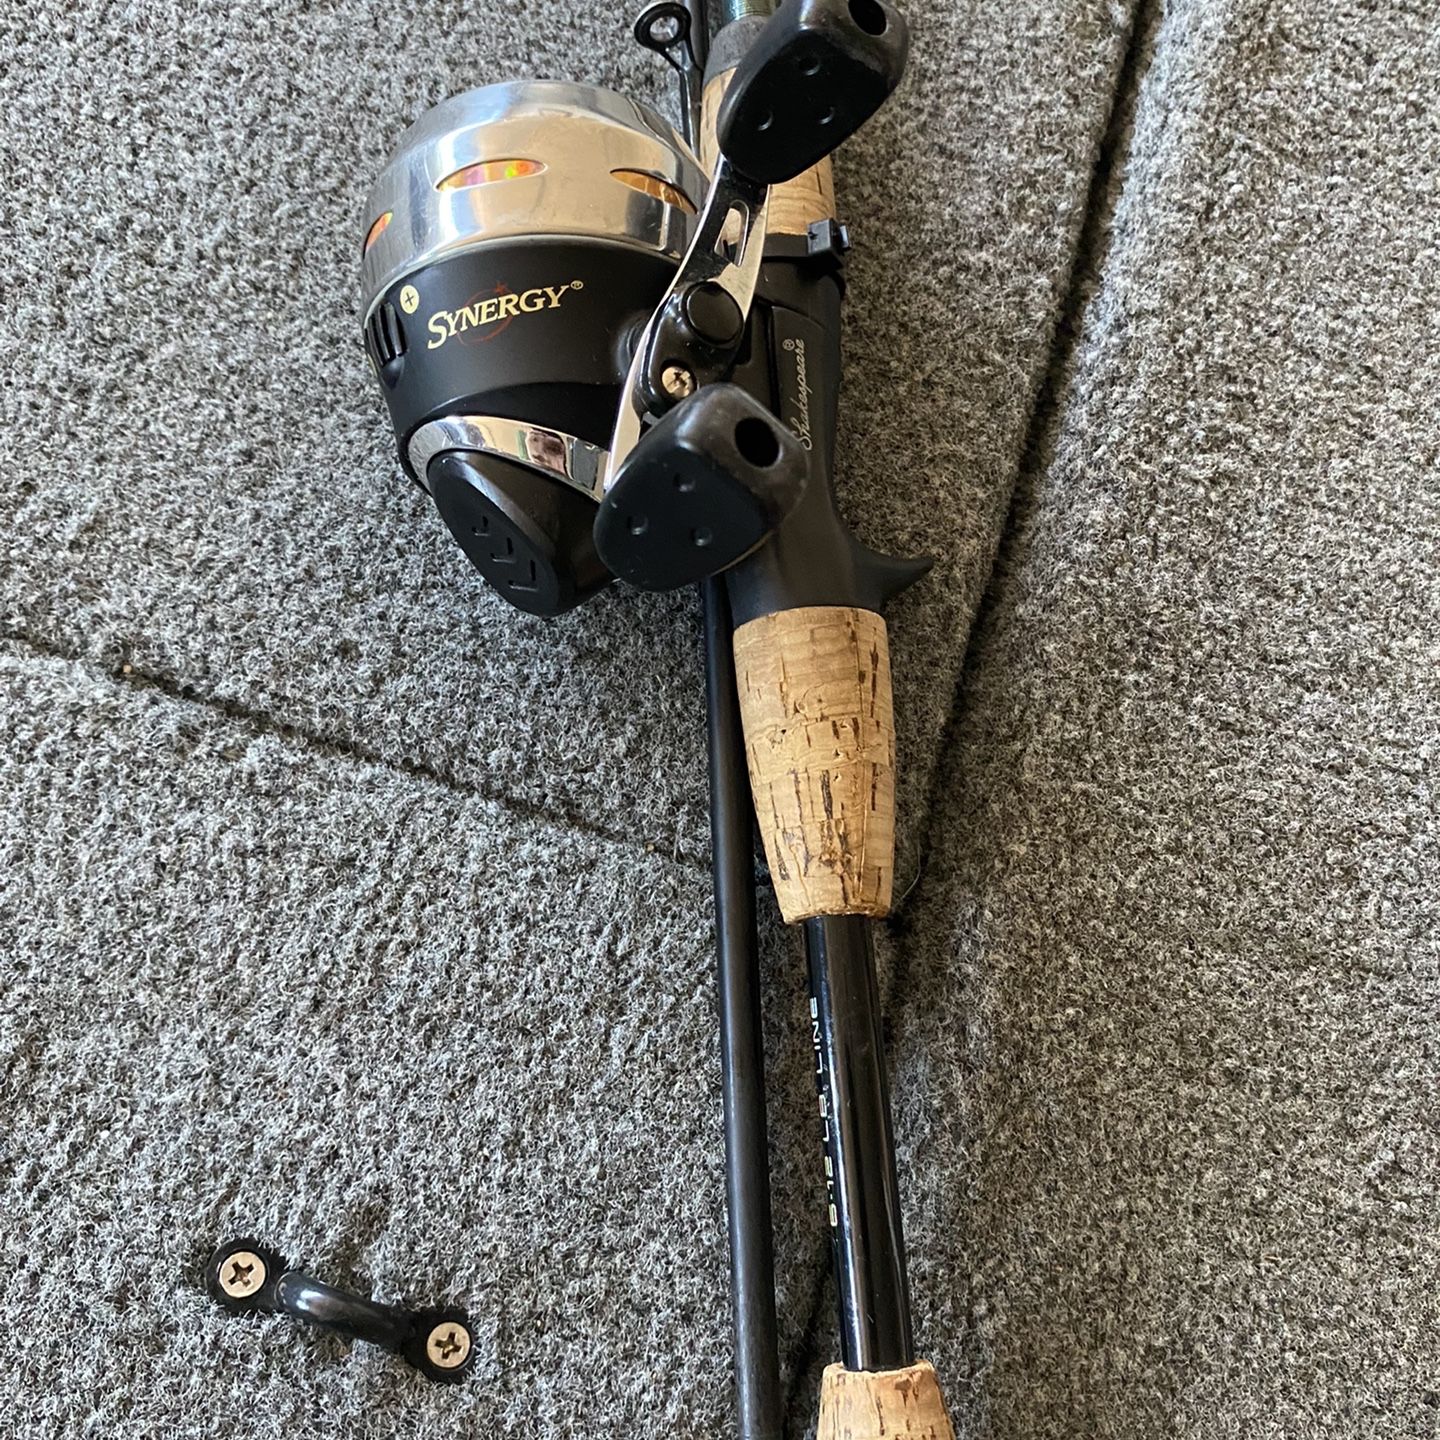 Shakespeare Conquest/Synergy Combo for Sale in Gilbert, AZ - OfferUp